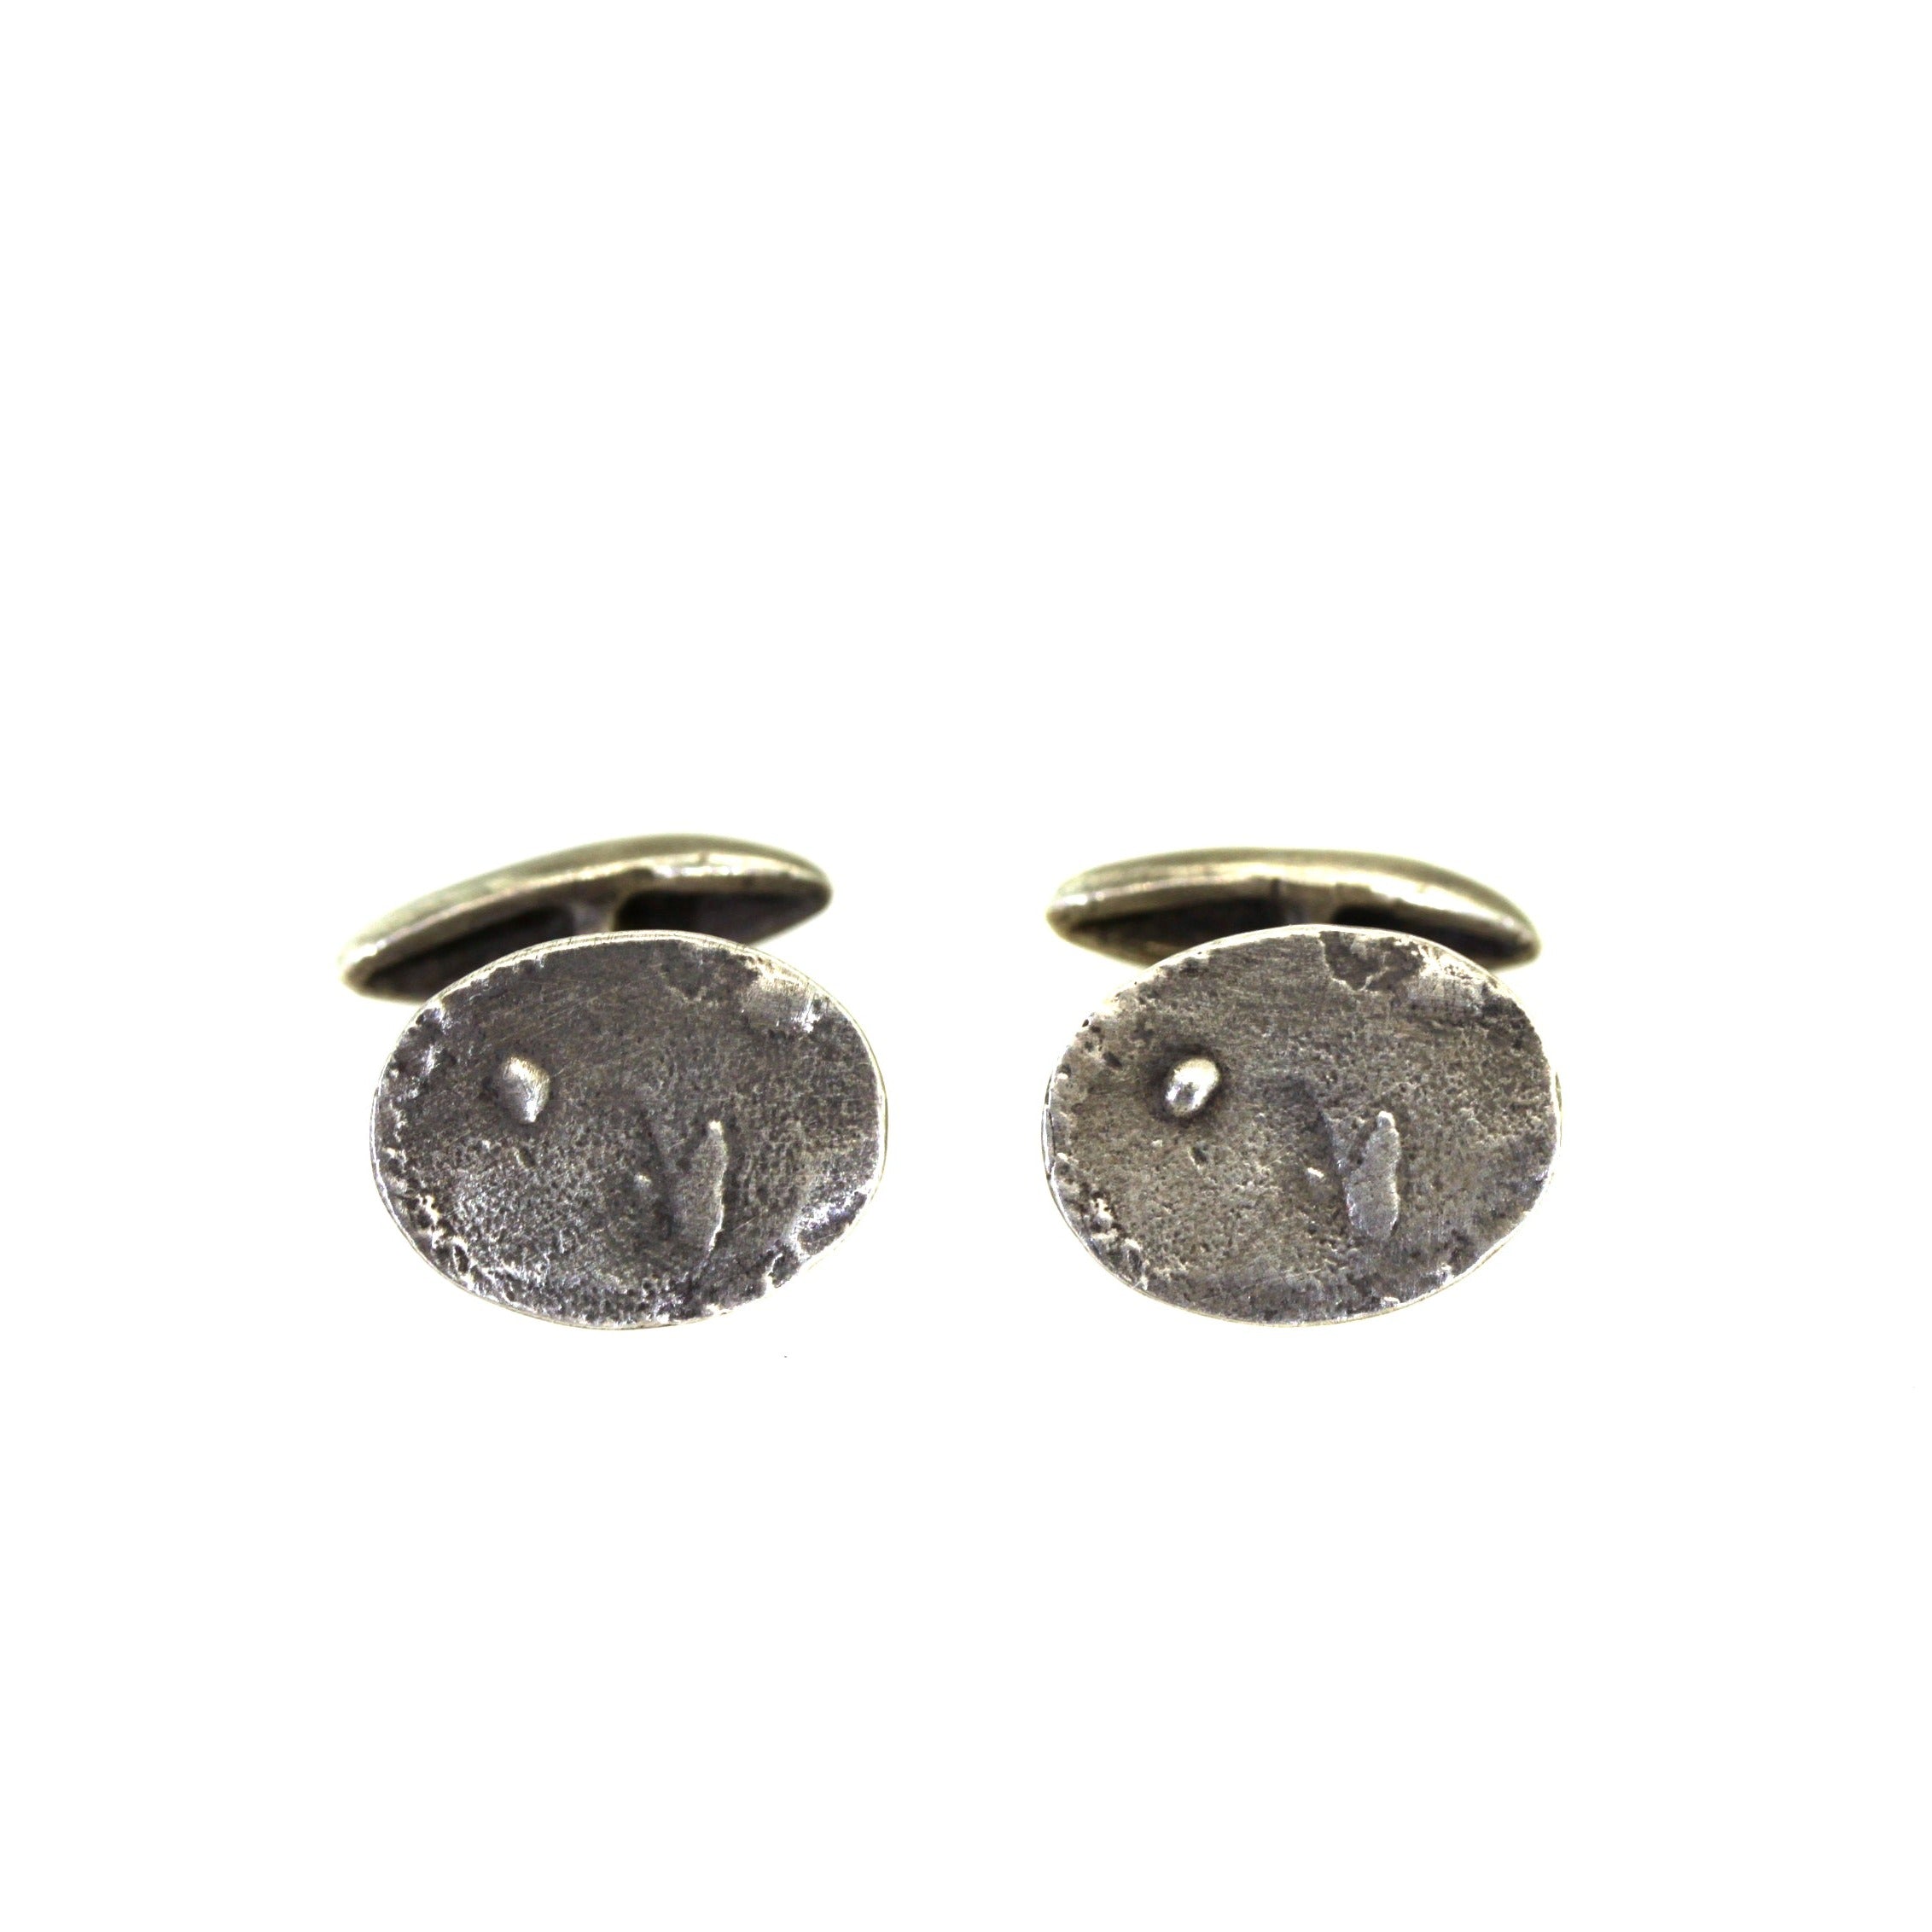 Vintage Oval Sterling Silver Cuff Links